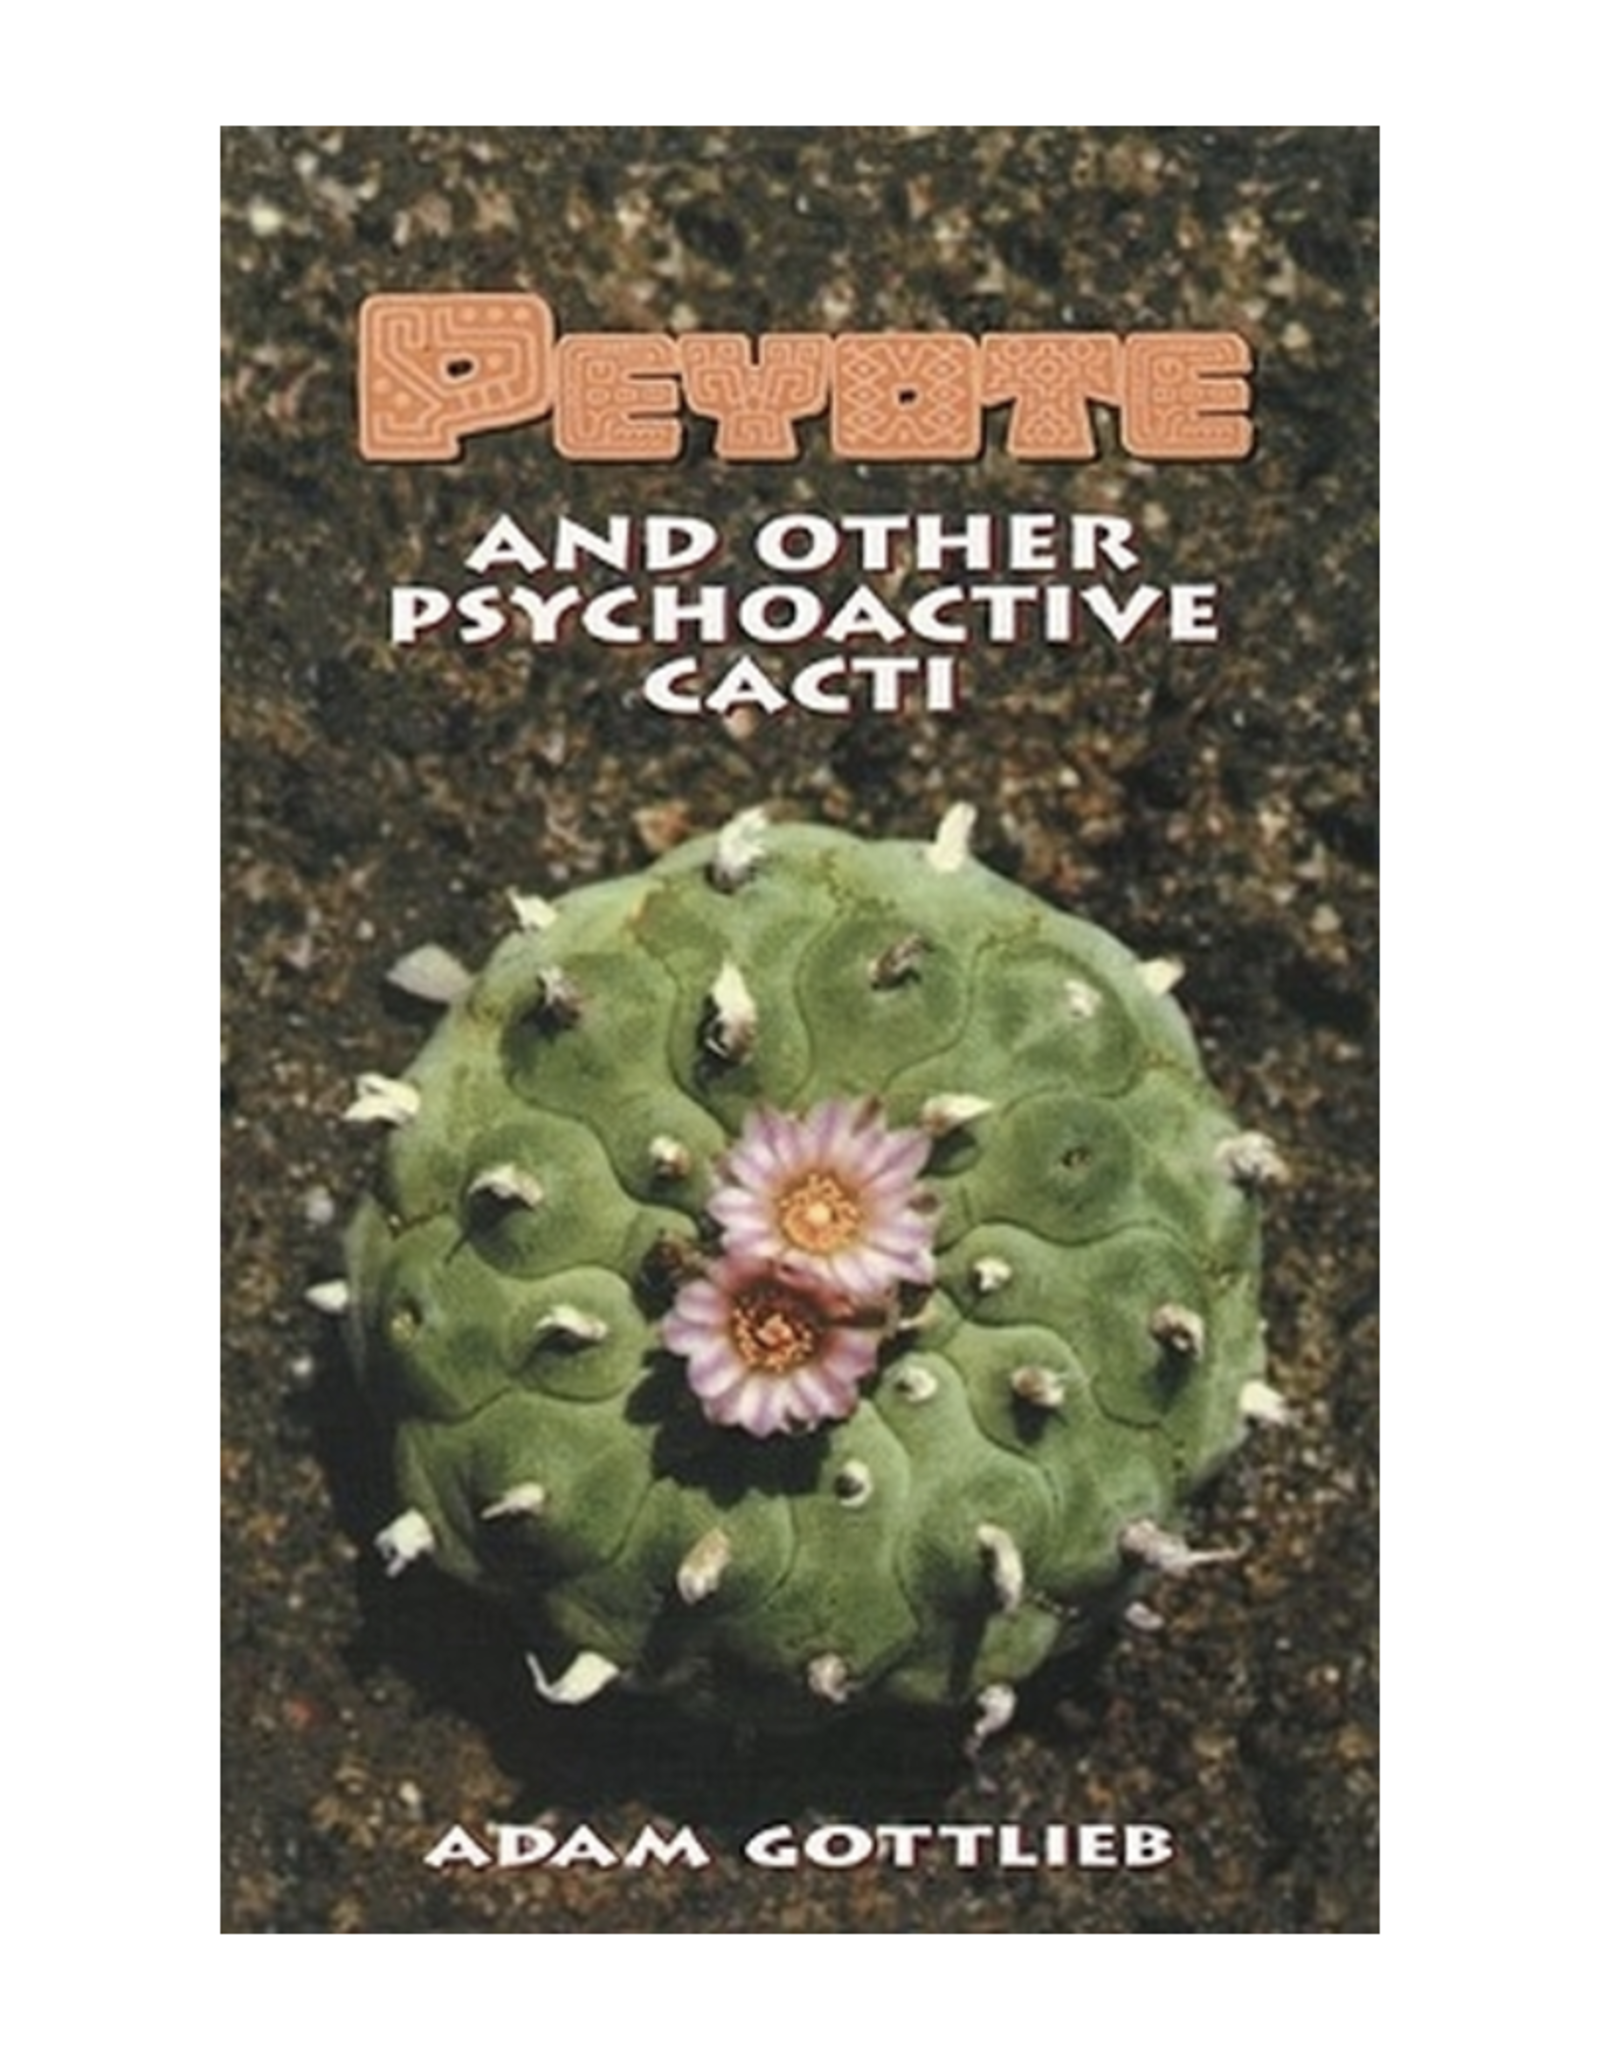 Peyote and Other Psychoactive Cacti by Adam Gottlieb